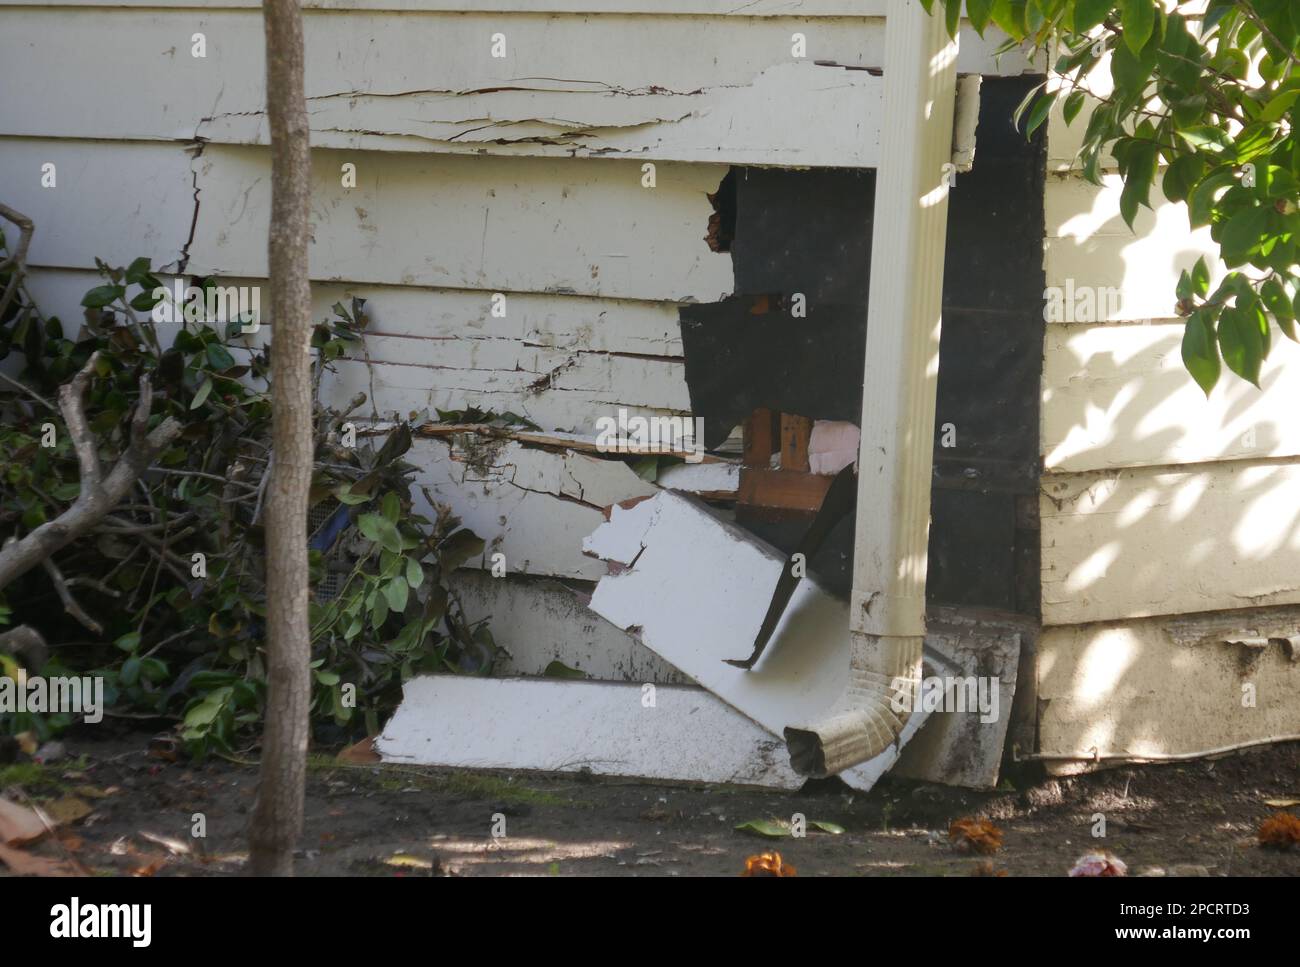 Beverly Hills, California, USA 13th March 2023 A general view of atmosphere of damaged home from Actor/comedian Pete Davidson and  Chsse Sui Wonders Car Accident where he hit a fire hydrant and crashed into house on Rodeo Drive on March 4, 2023 in Beverly Hills, California, USA. Photo by Barry King/Alamy Stock Photo Stock Photo